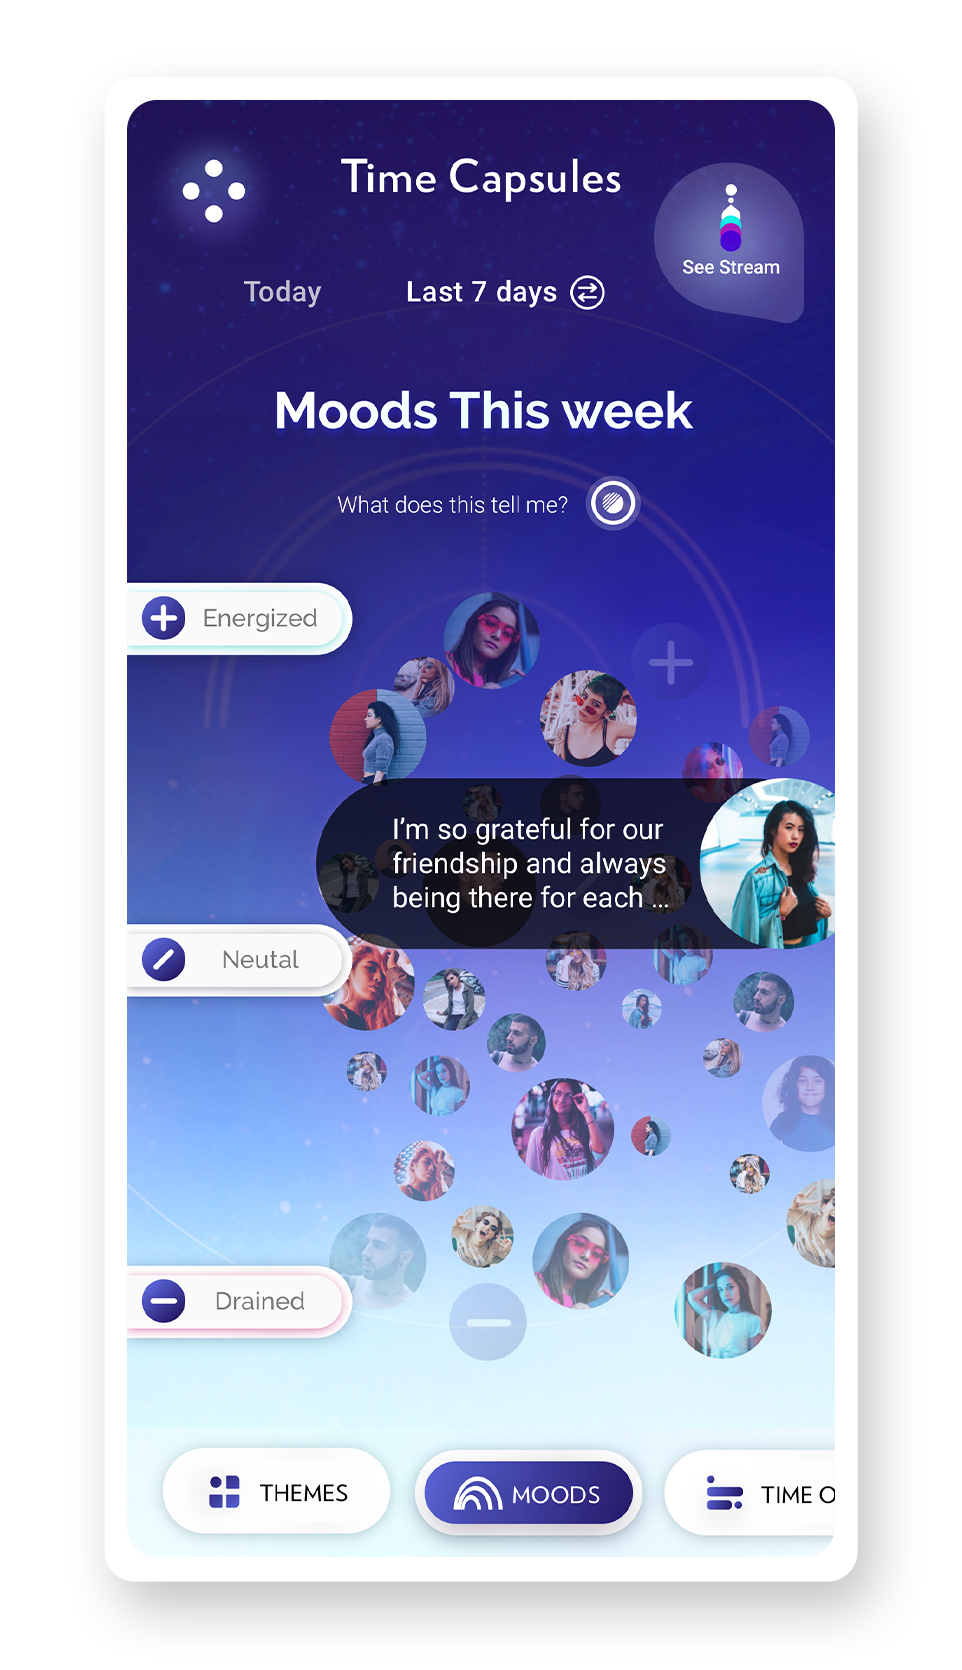 evrmore helps you see patterns and influences on your moods to get unstuck from worry spirals